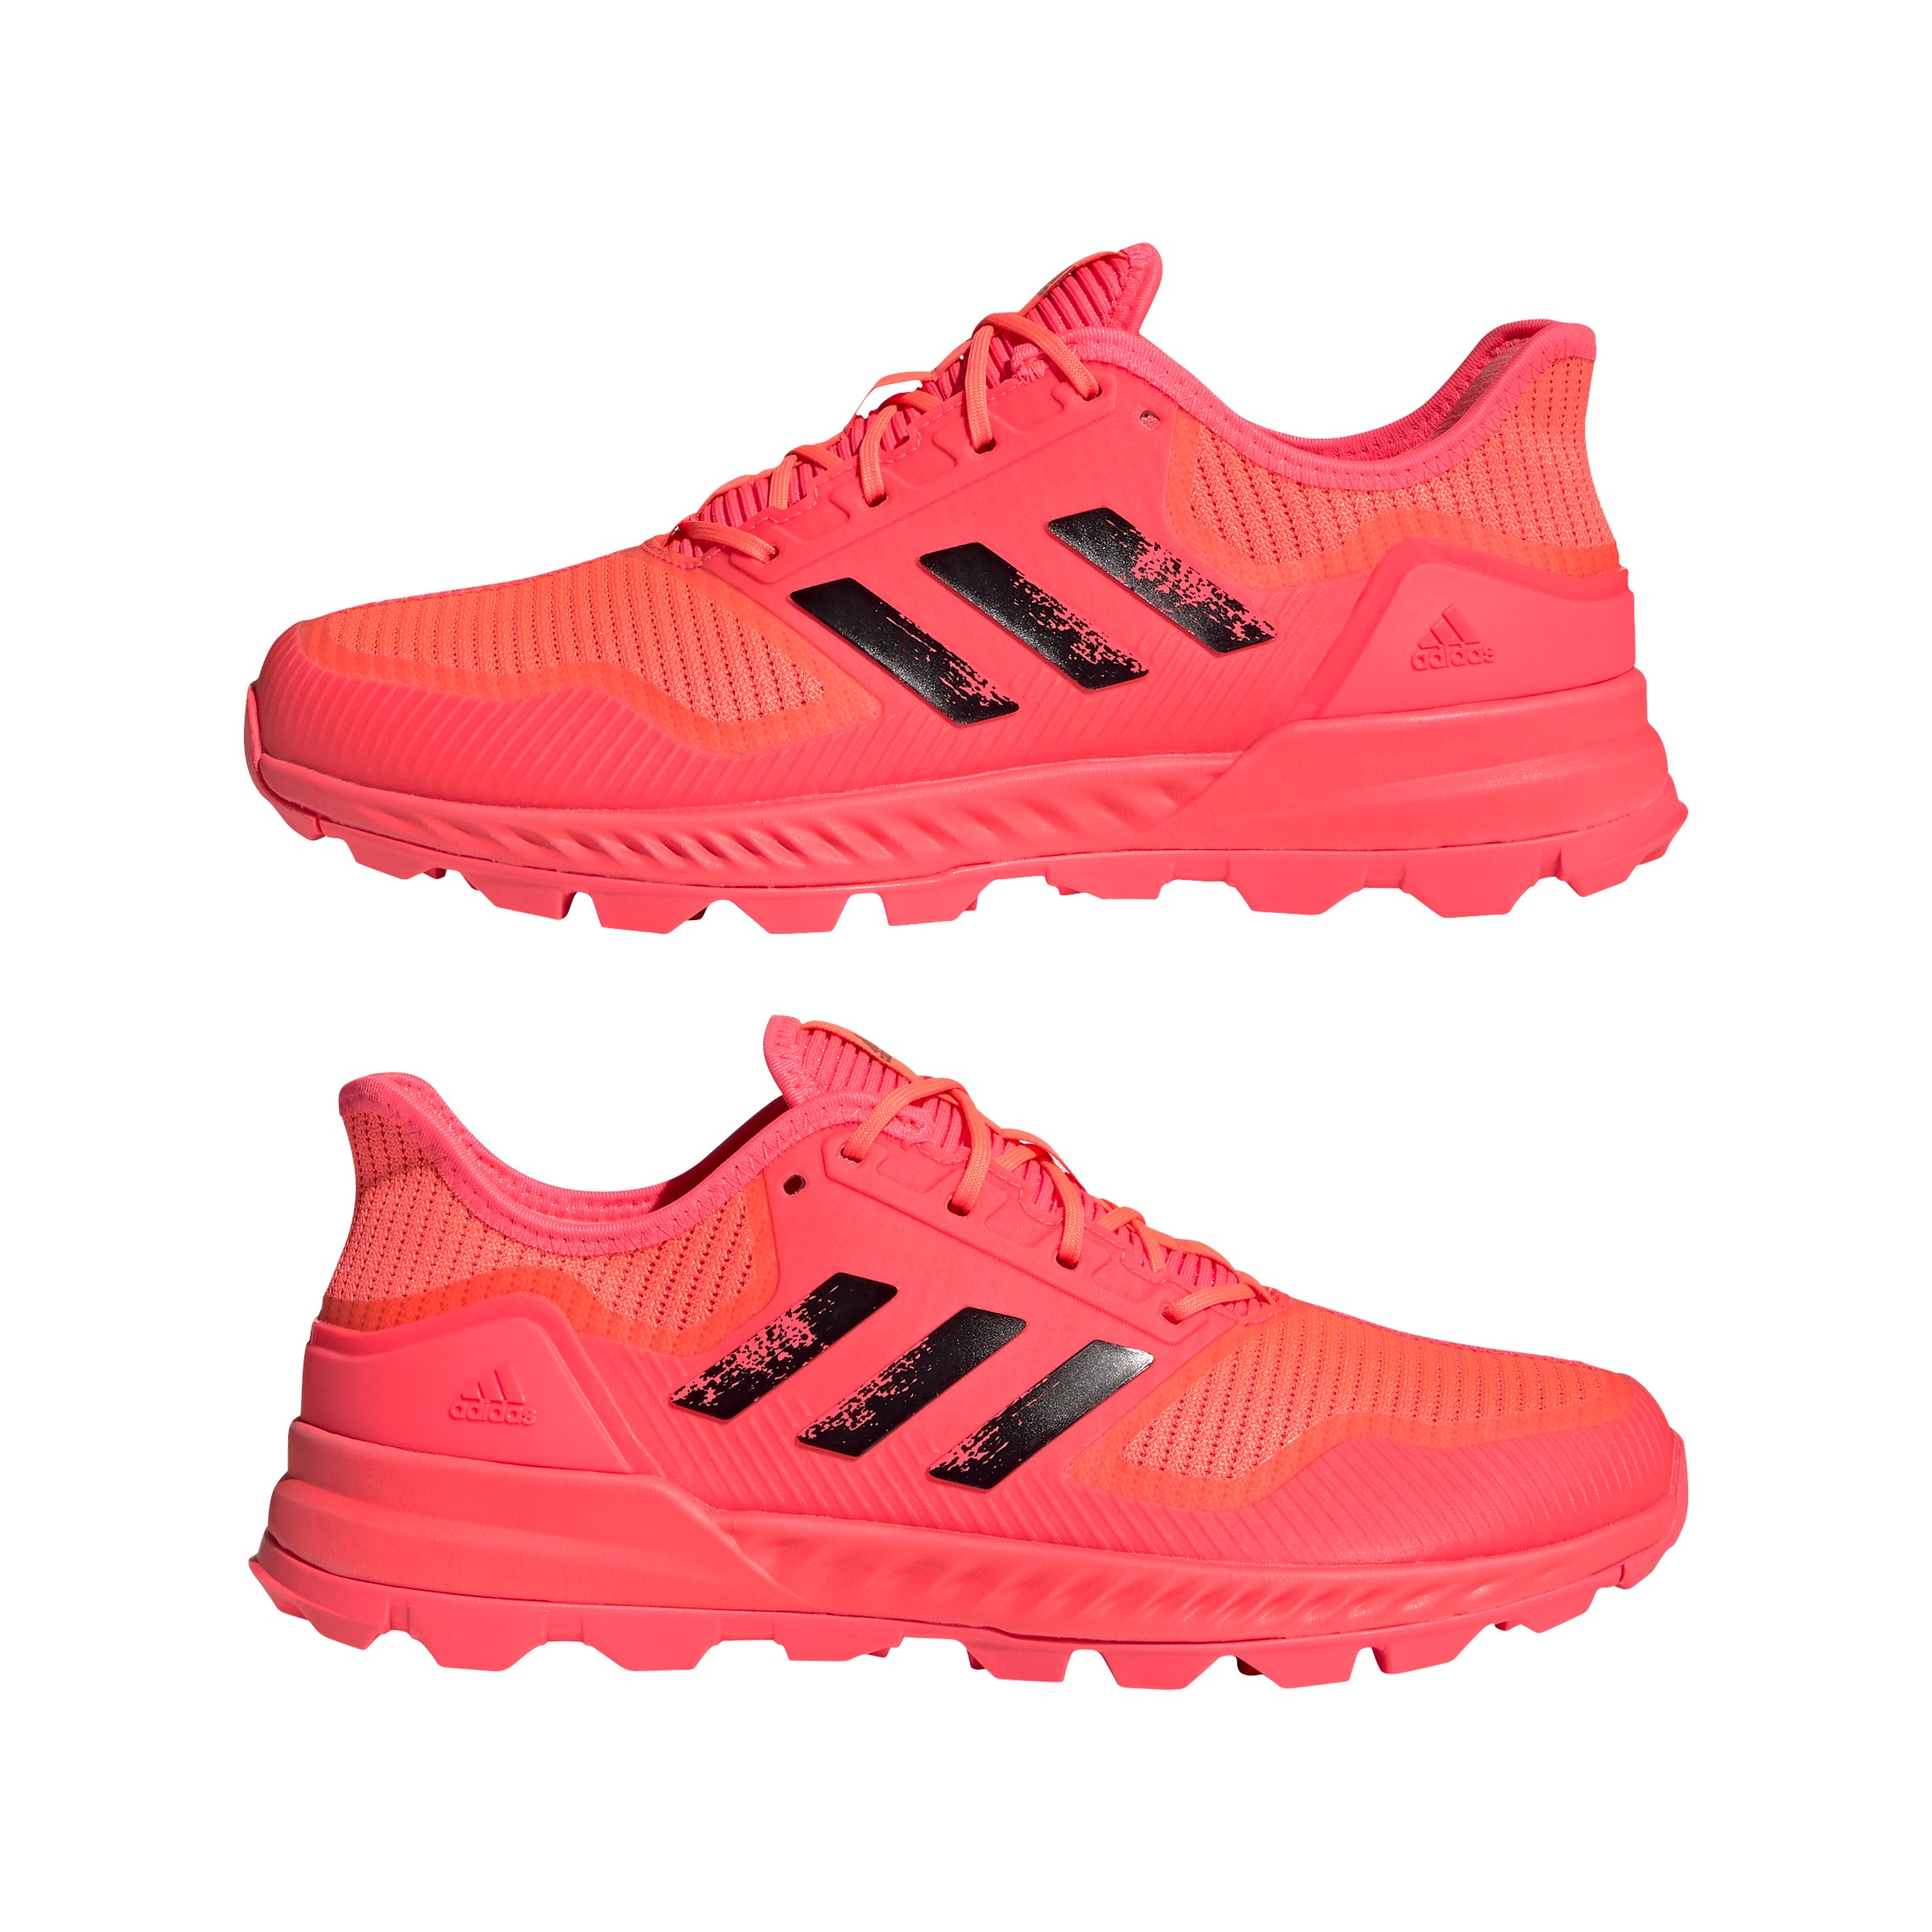 douche Carry Bier 🔥 Adidas Adipower Hockey Shoes - Pink (2020/21) | Next Day Delivery 🔥